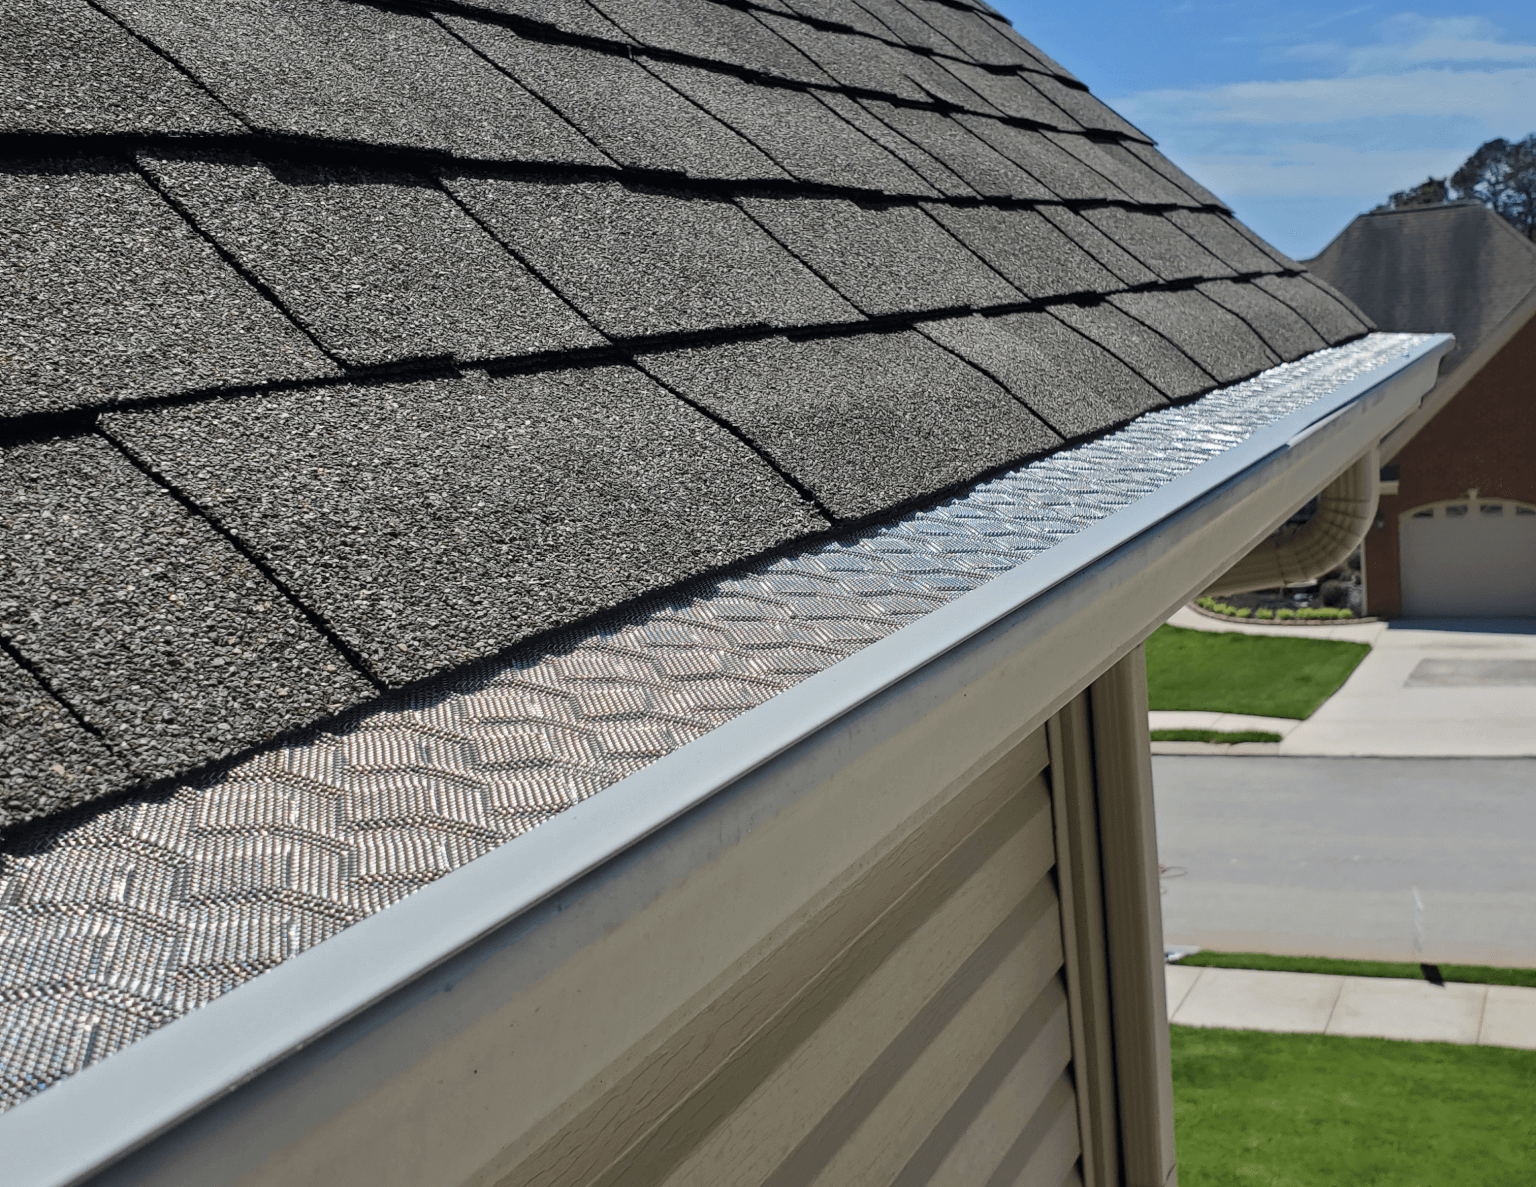 HomeCraft leaf guards protect your Greely, CO home from clogged gutters.